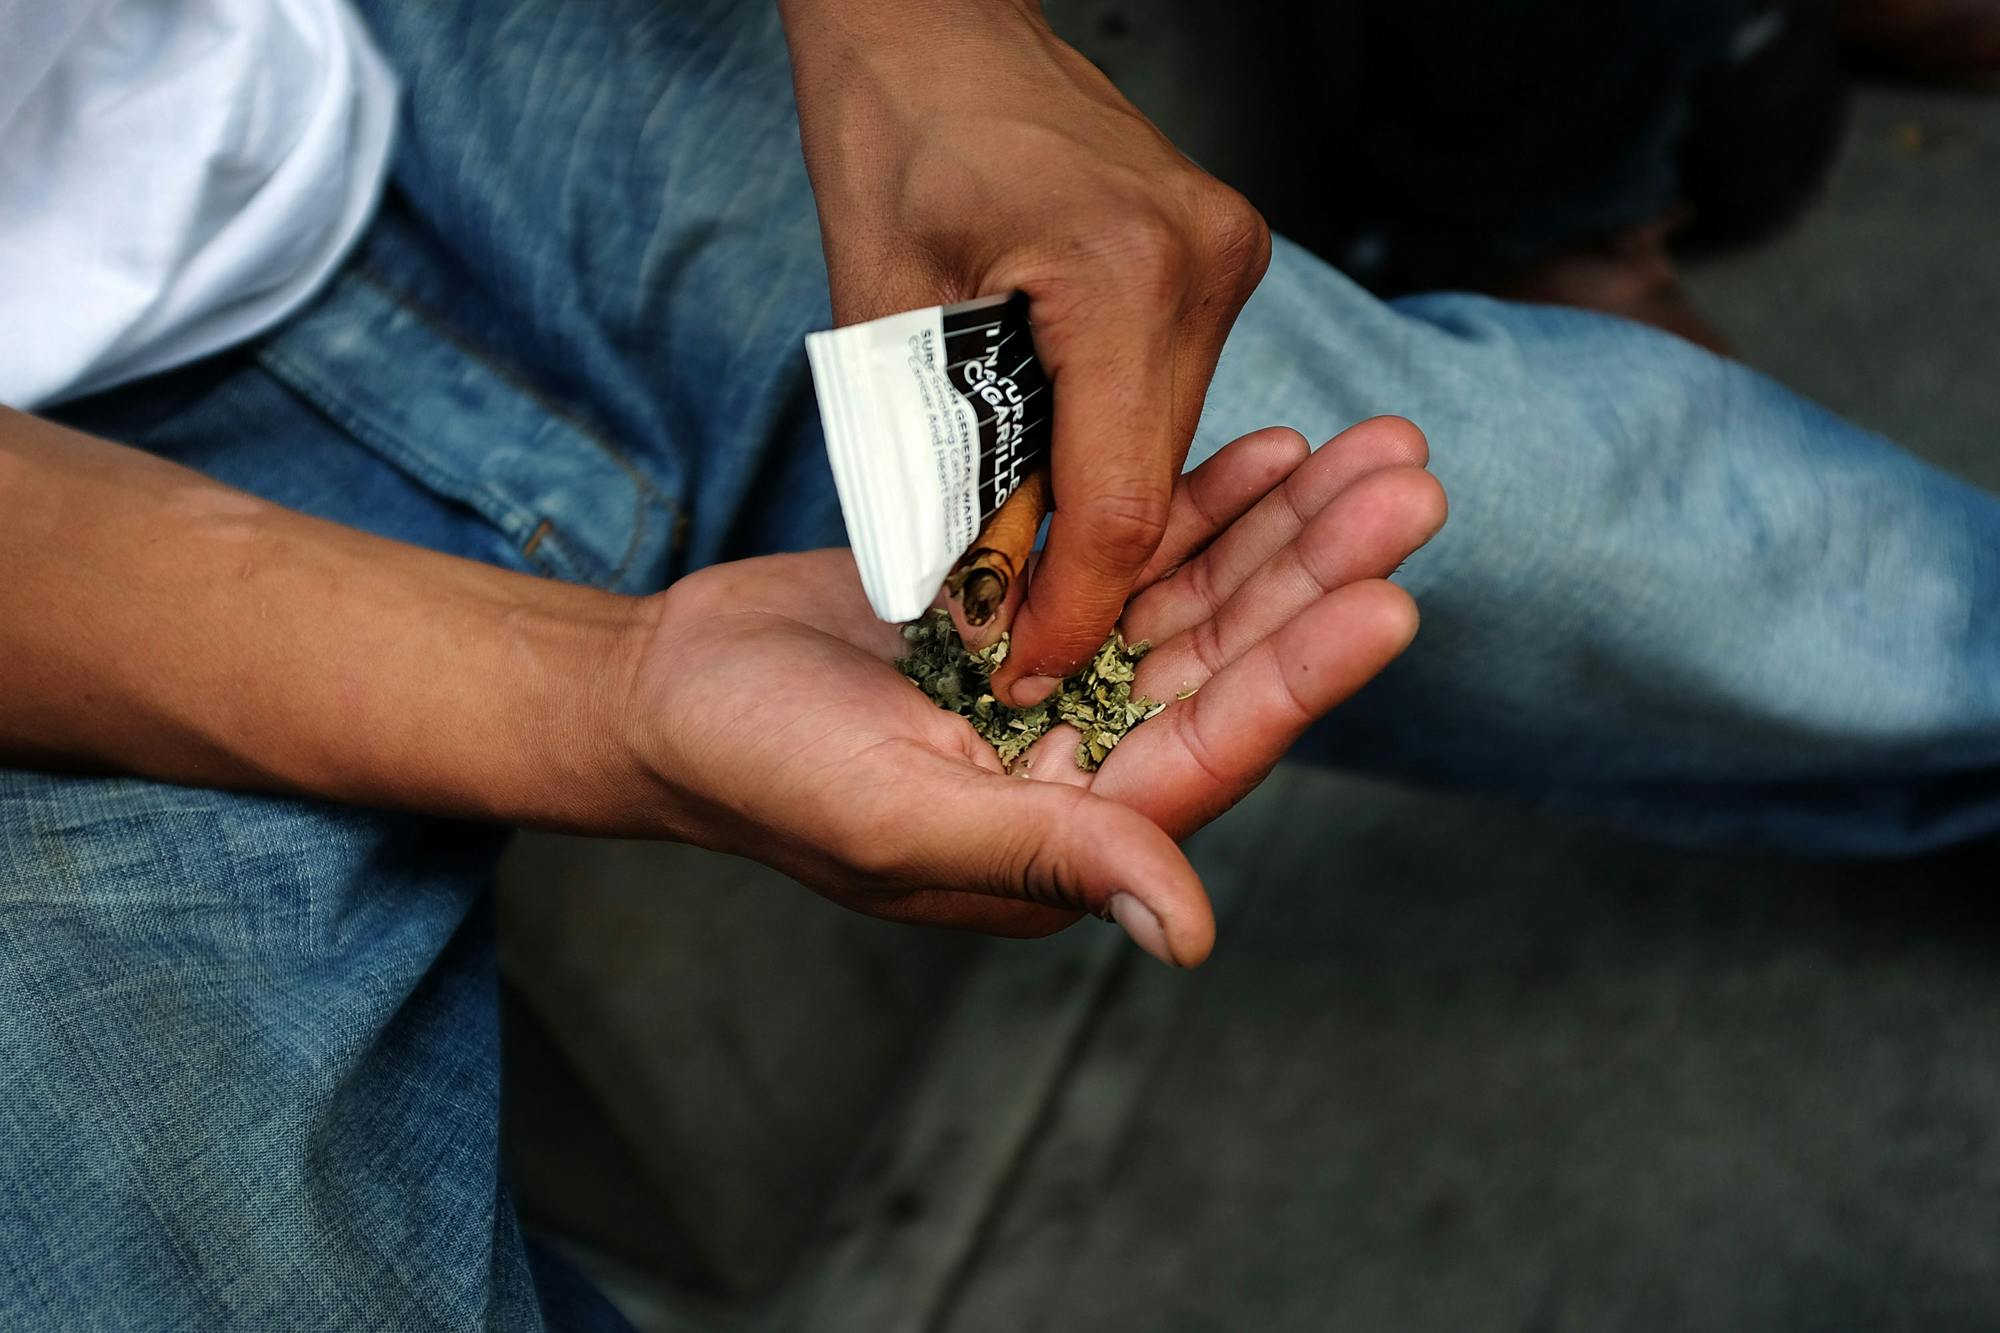 The DEA just approved synthetic cannabis as medicine while the real thing remains illegal 2 of 5 The DEA approves synthetic marijuana as medicine while the real thing remains illegal